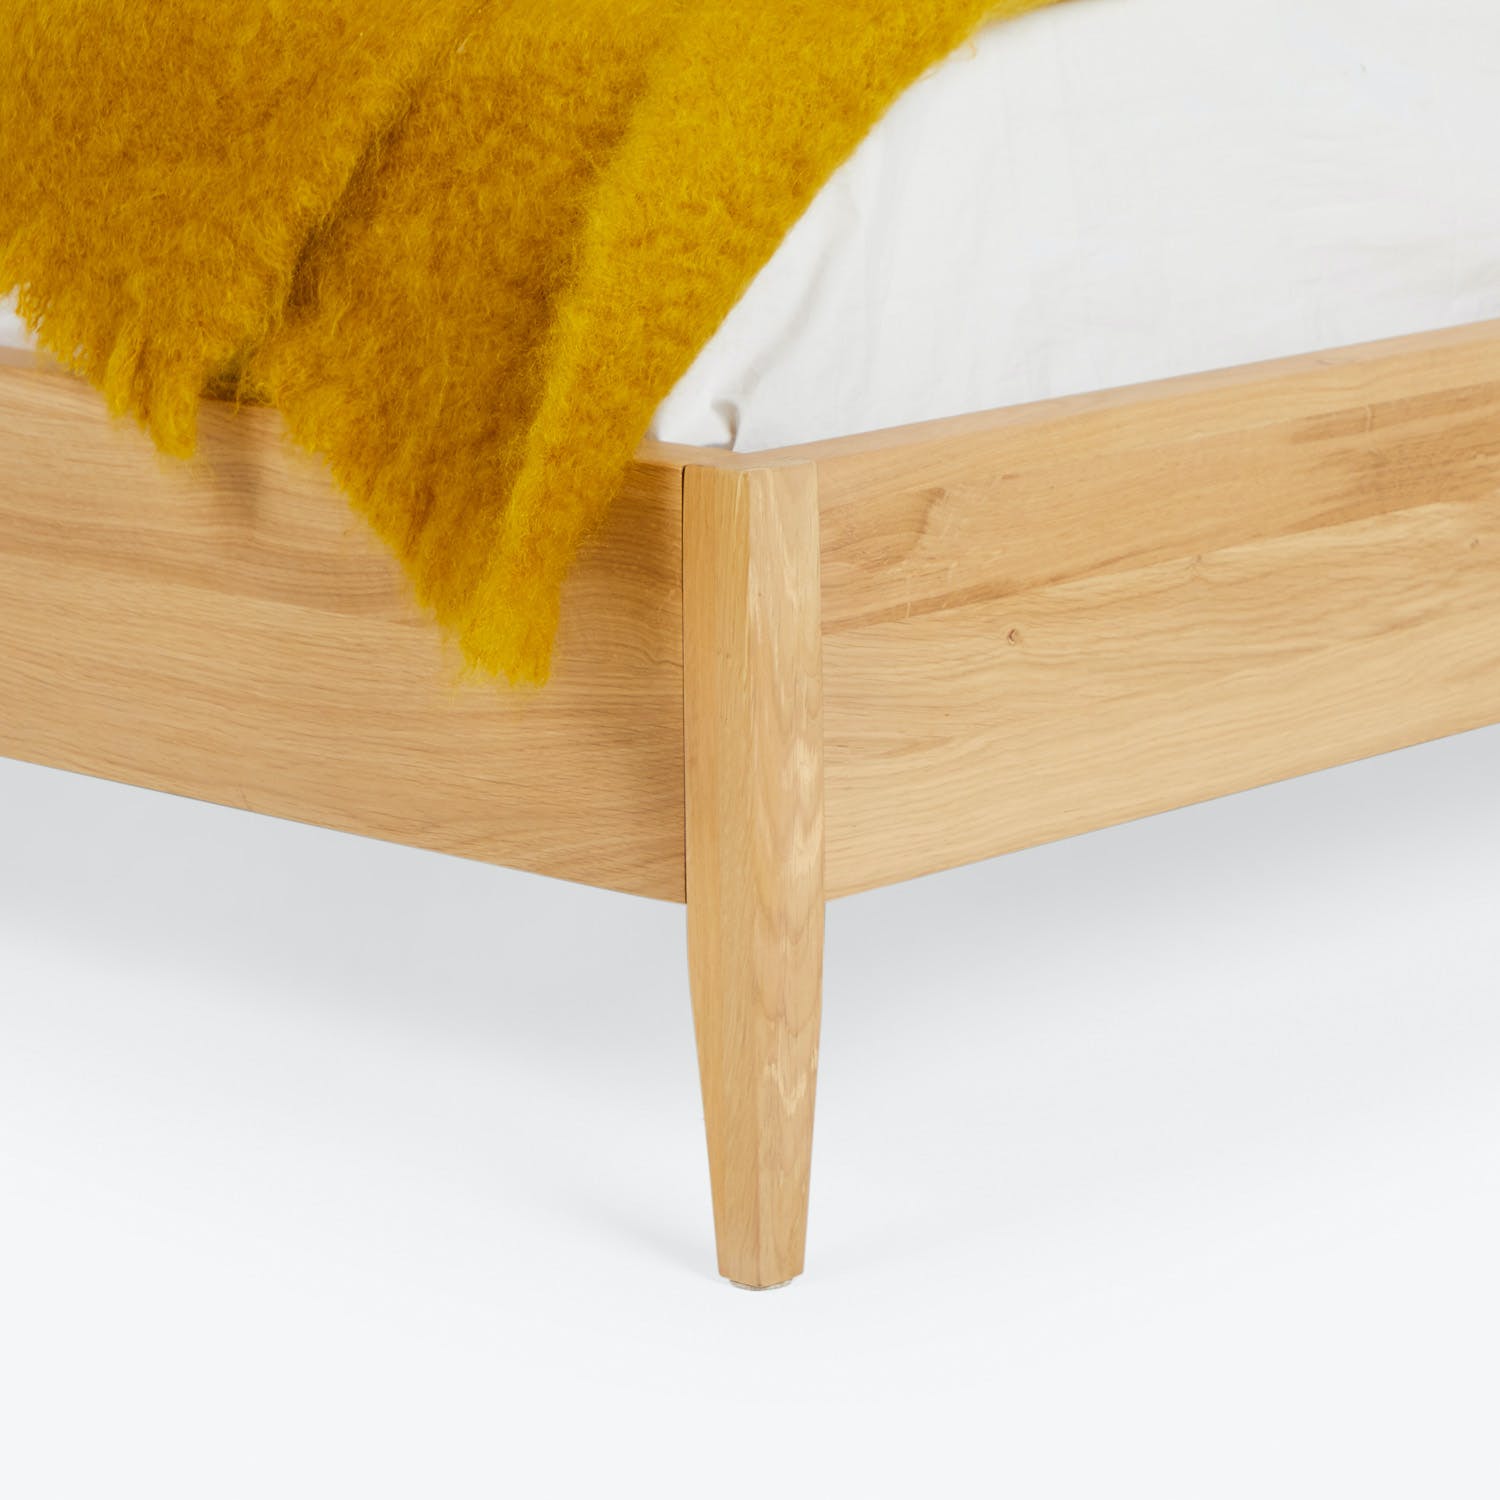 Close-up of modern wooden bed frame with sleek design and yellow blanket.